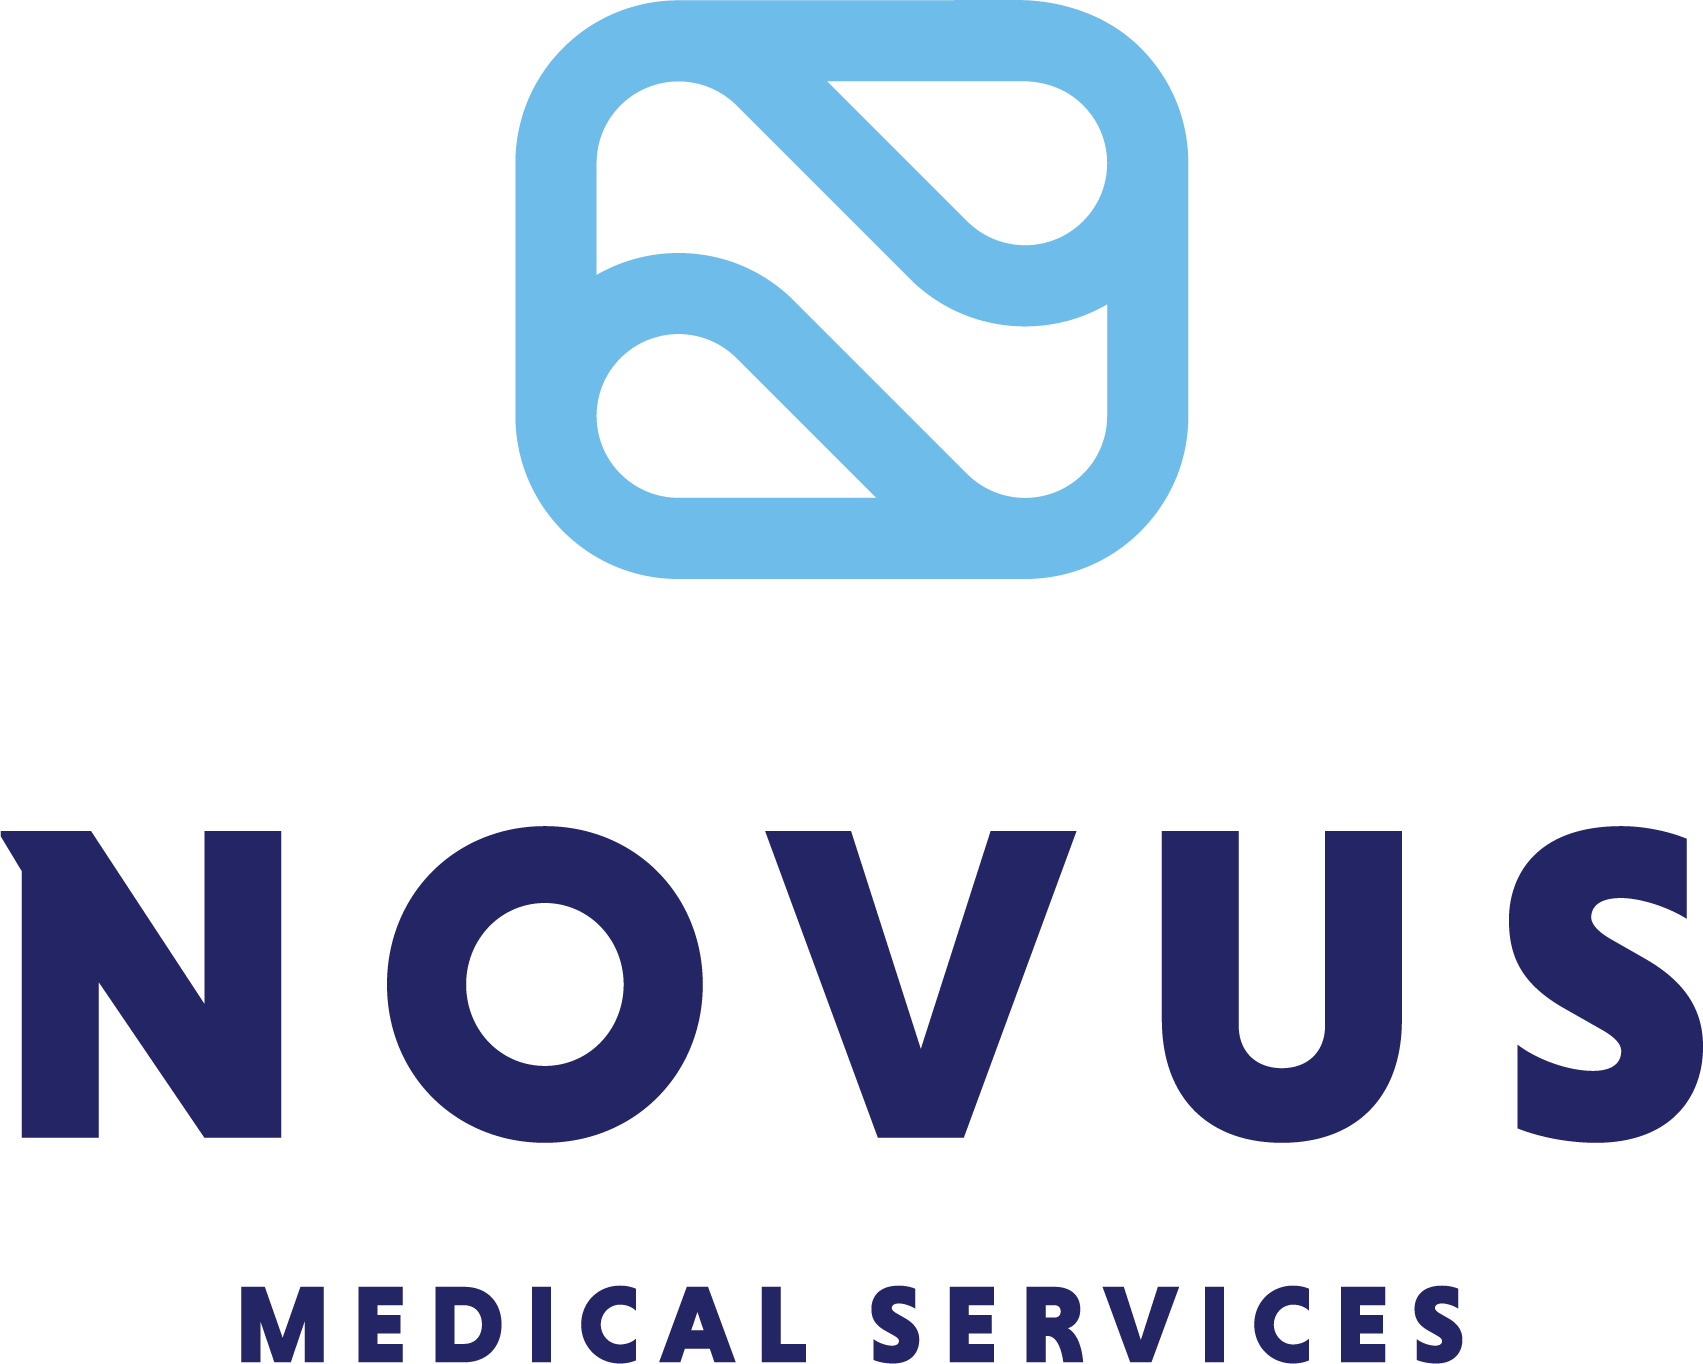 Novus-Primary-2 color.png